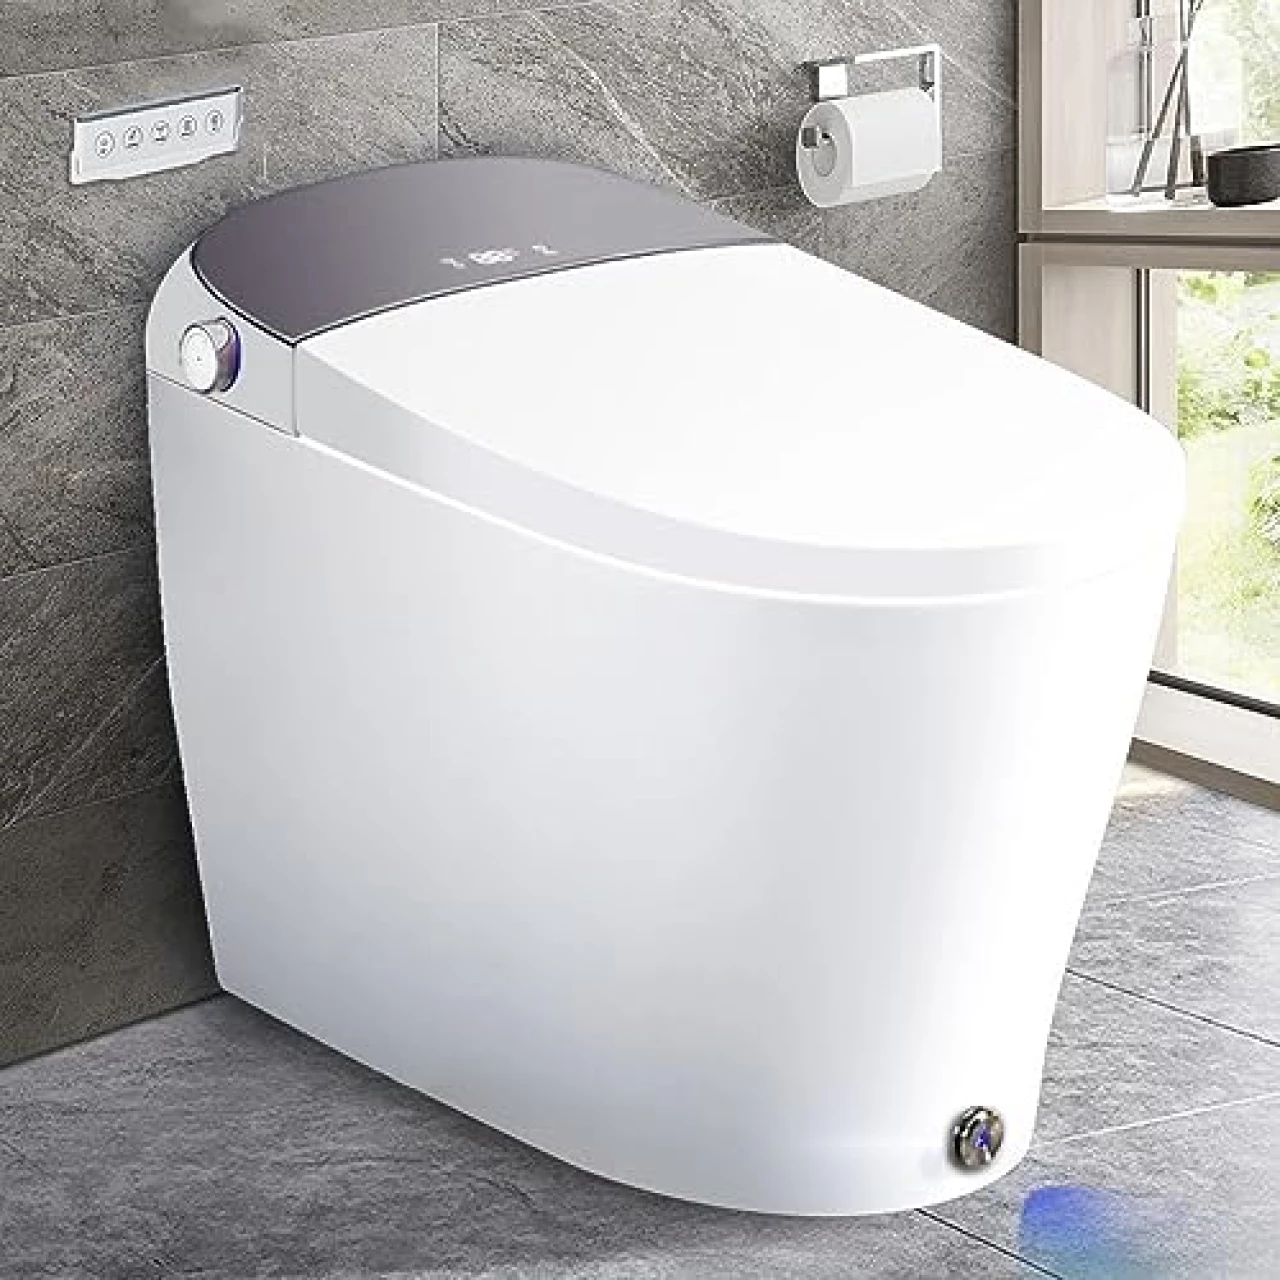 EPLO Smart Toilet Heated Seat,Off-seat Auto Flush,Foot Kick Flush,Blackout can Flush,Warm Wash,One piece Toilet with Bidet built in,Night Light,LED Display,Modern Elongated Toilets for Bathrooms